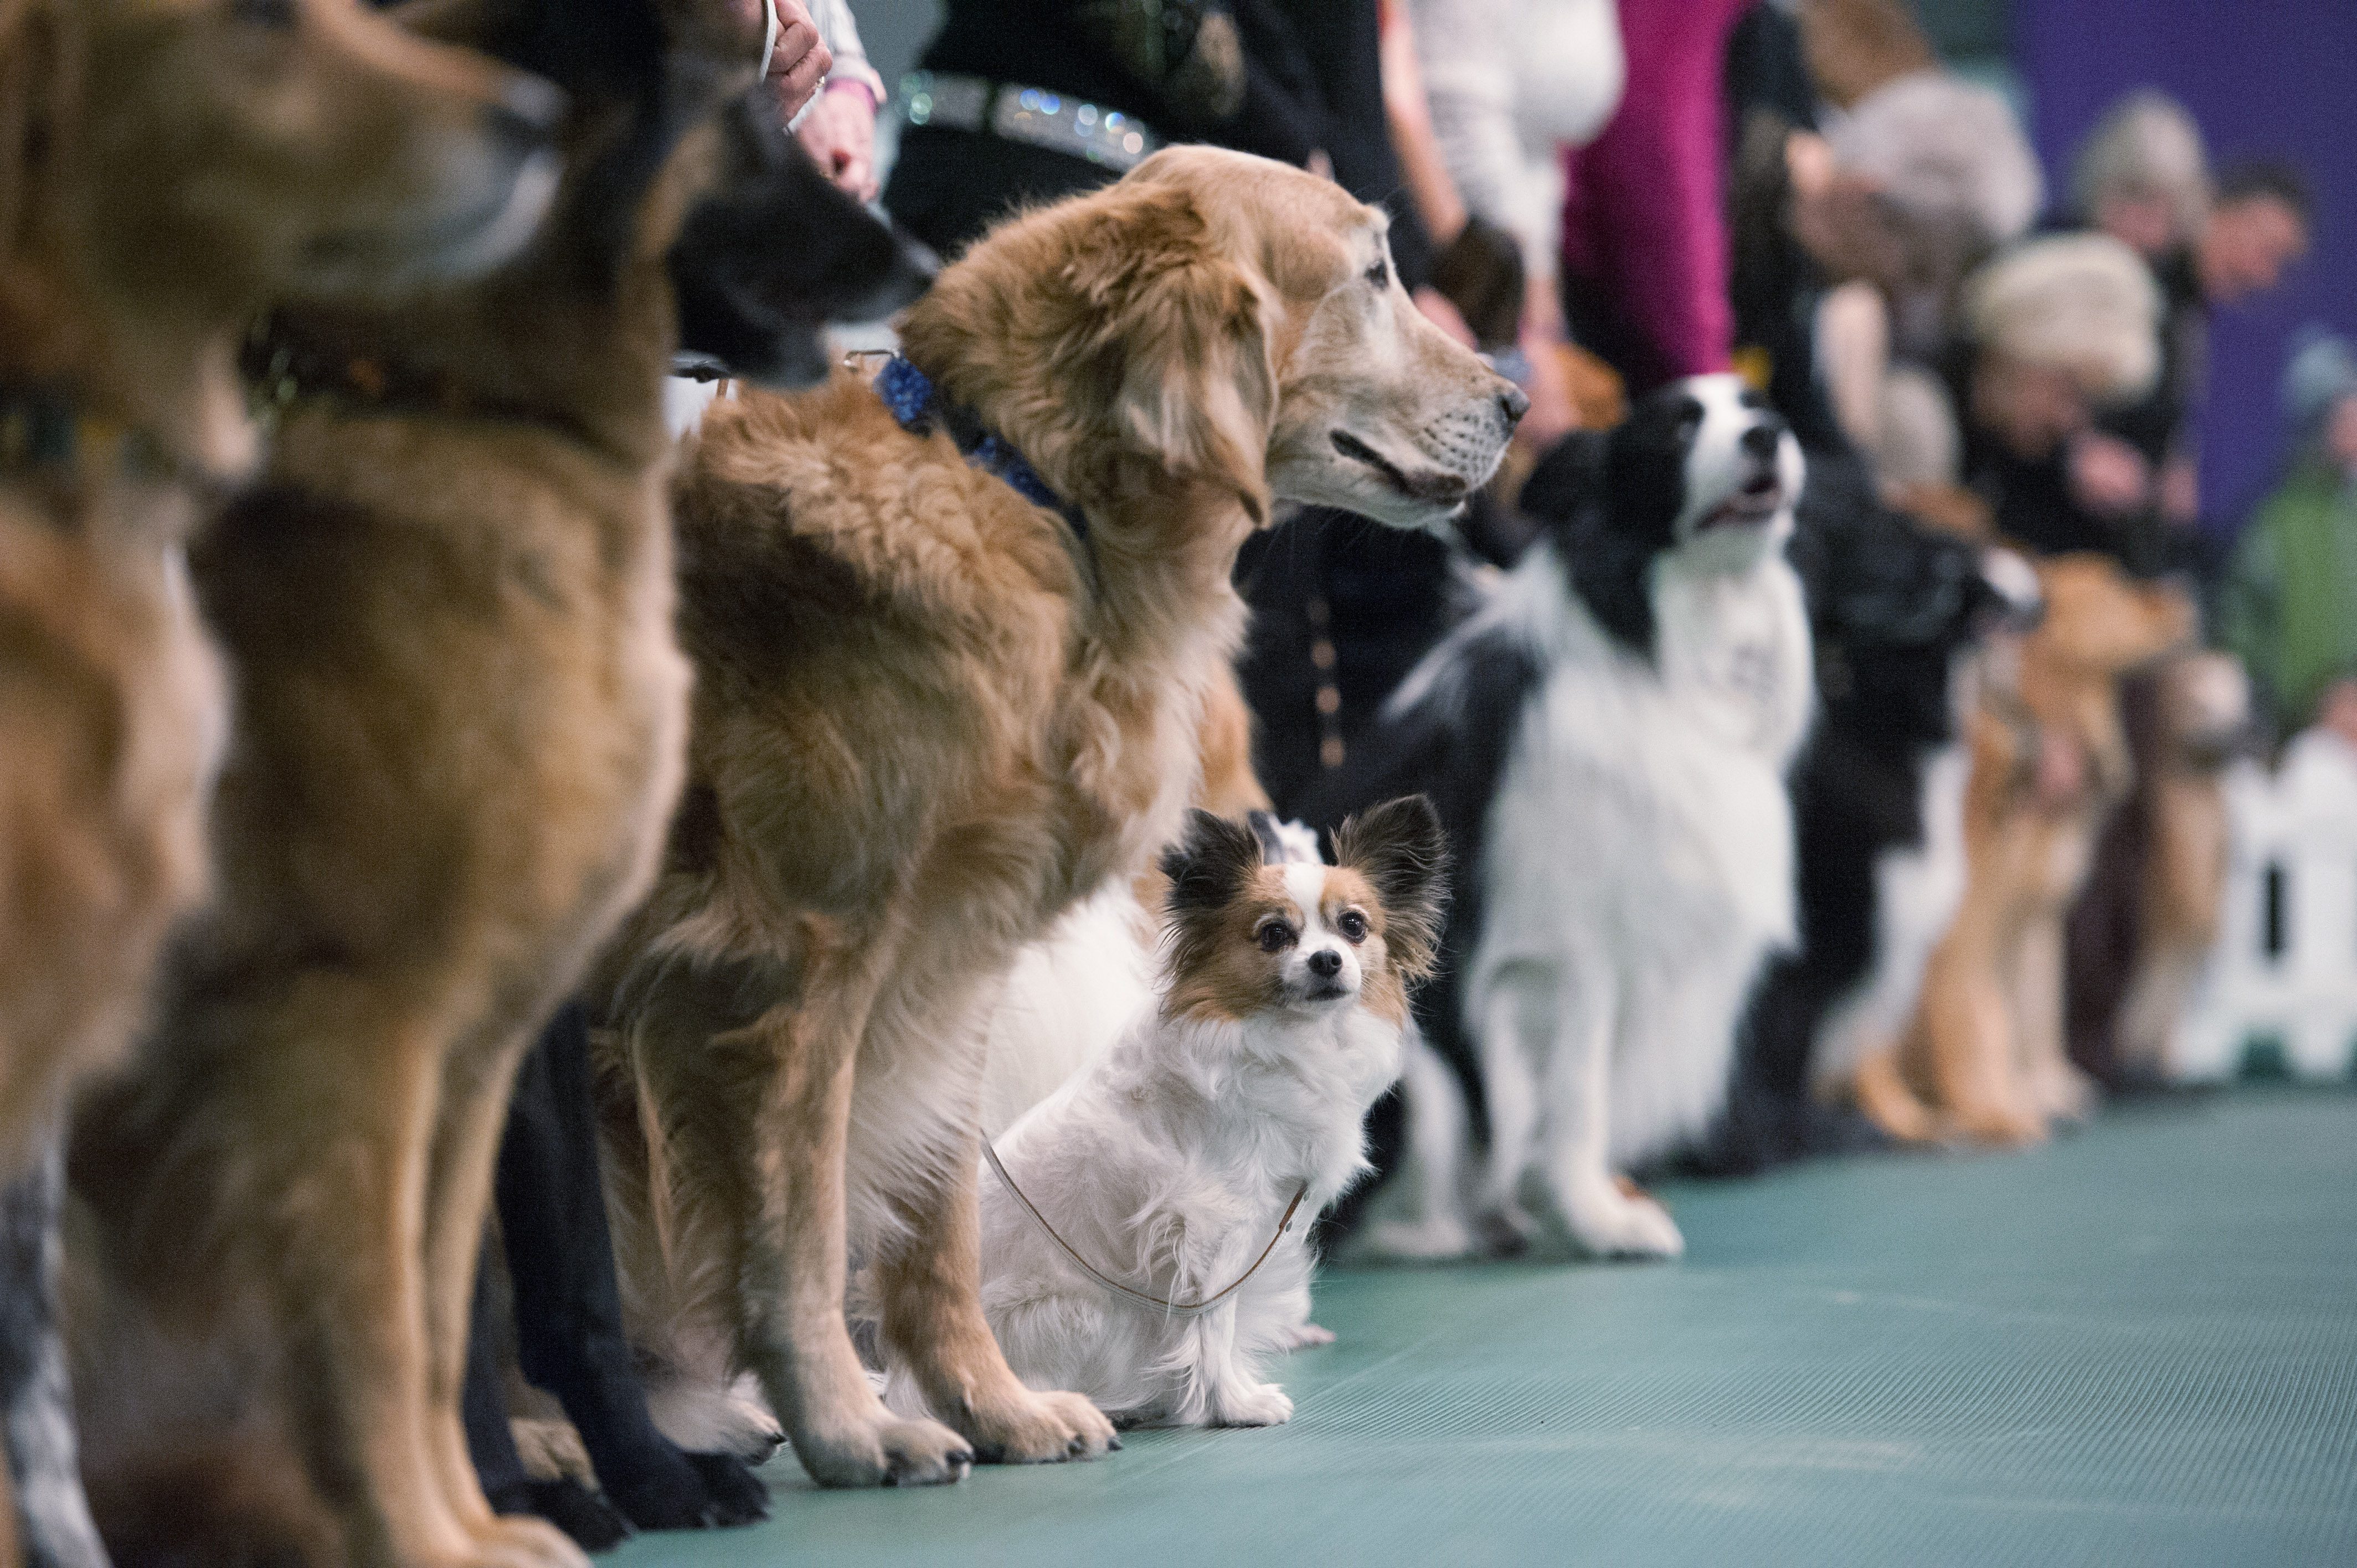 Facts About the Westminster Dog Show Reader's Digest